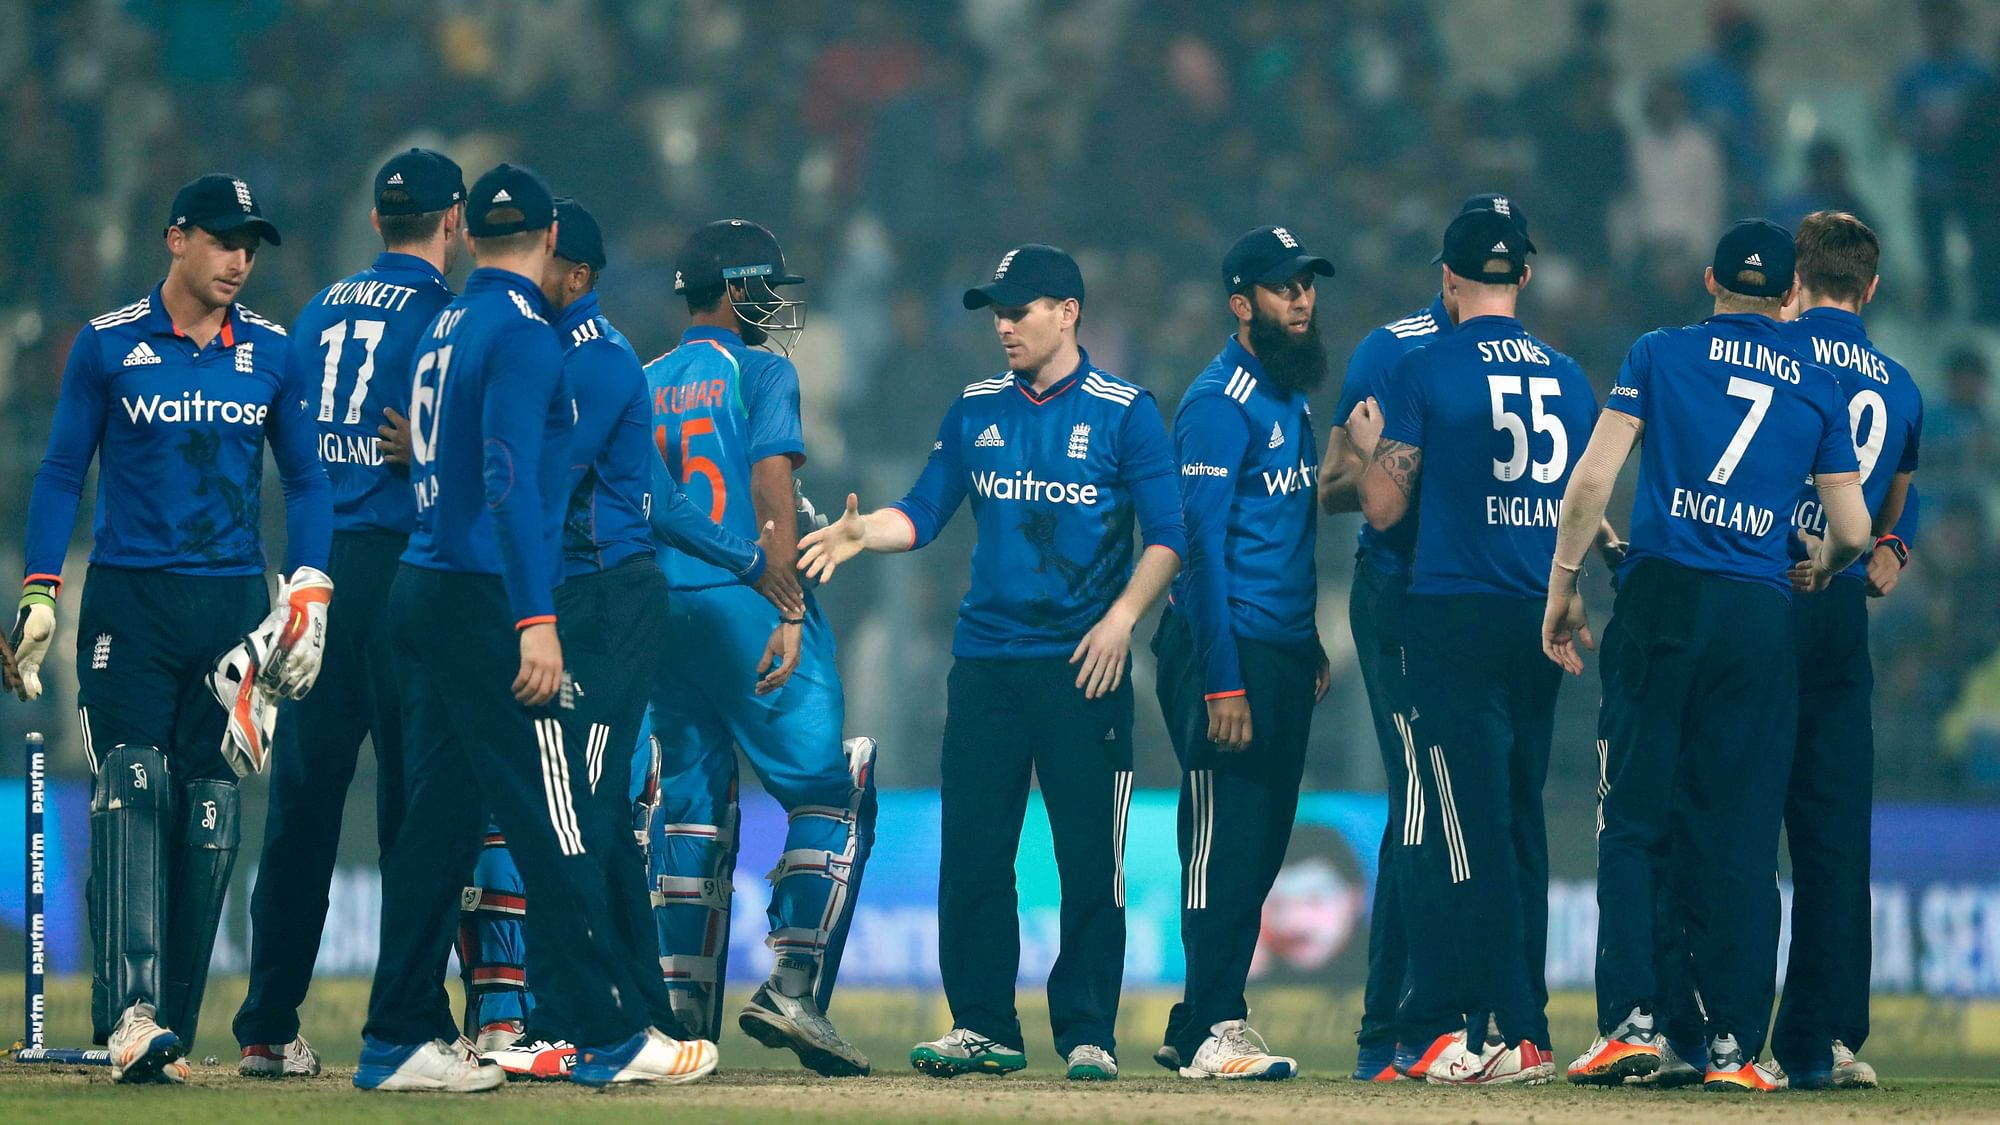 The English cricketers shake hands with their Indian counterparts after an ODI in India earlier this year.  (Photo: AP)